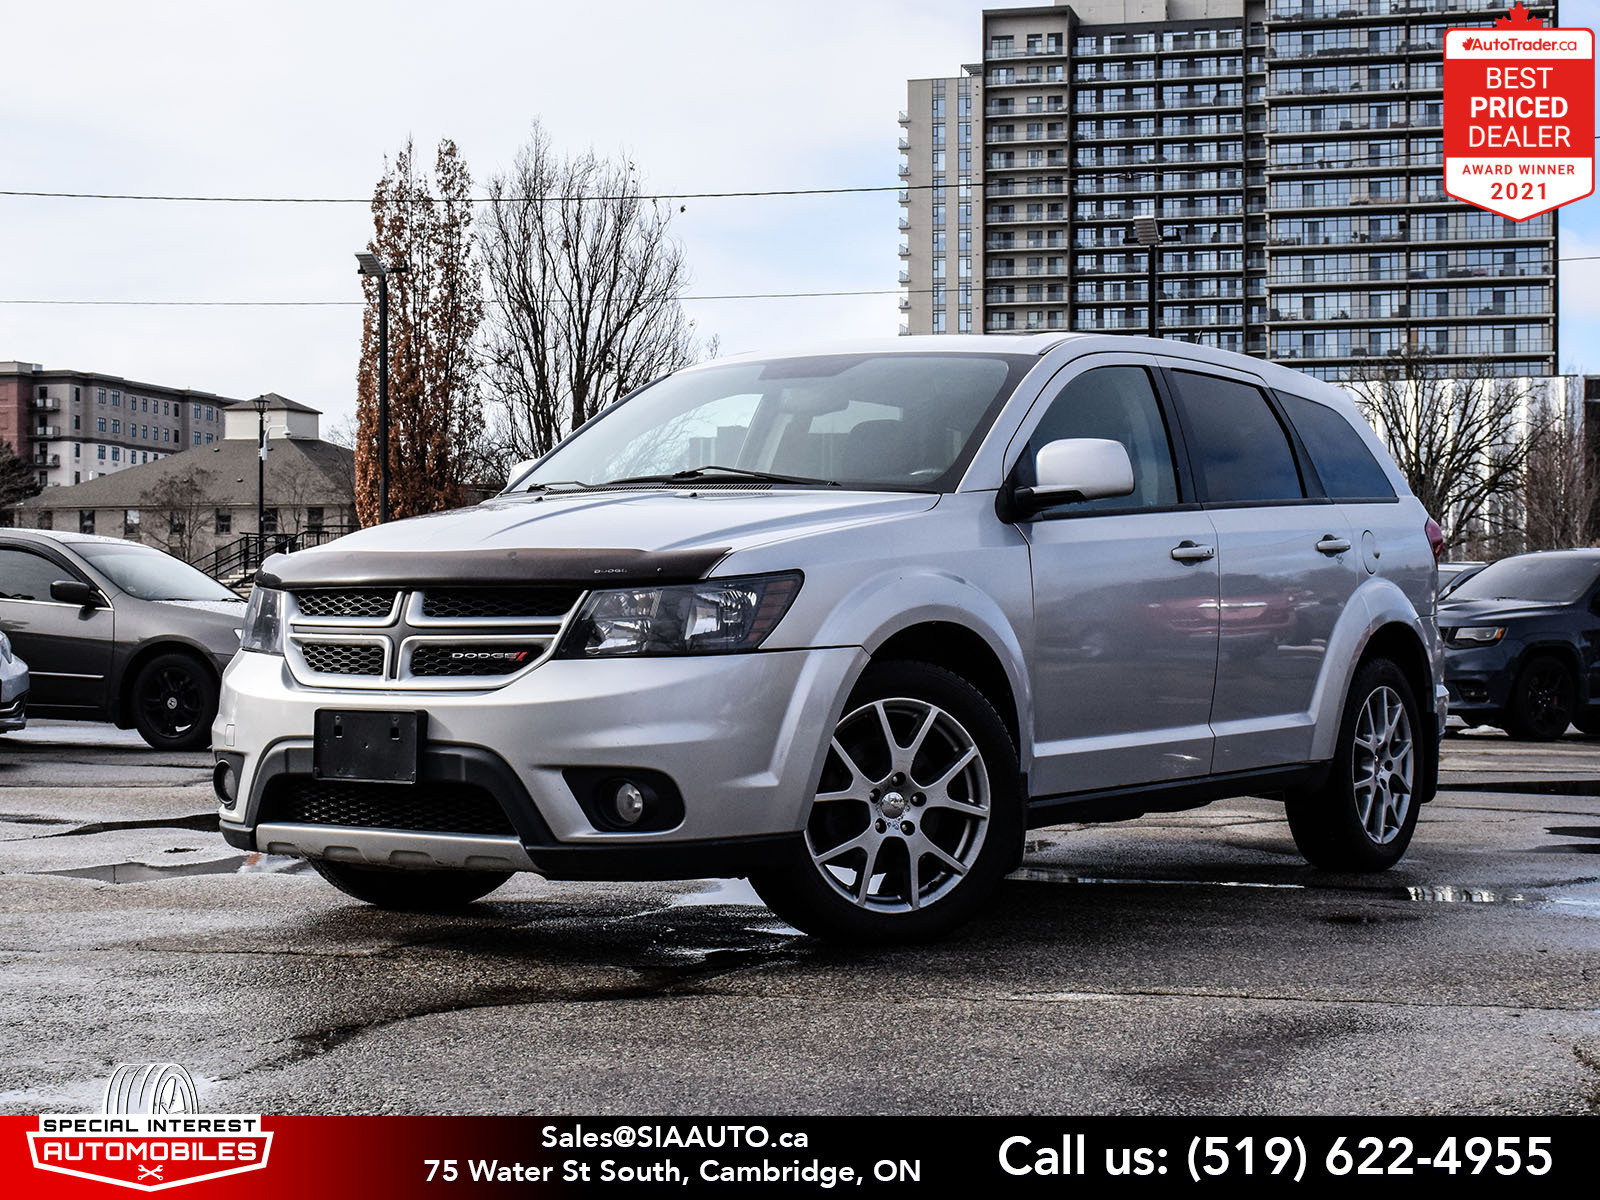 2014 Dodge Journey AWD R-T Rallye * SOLD * SOLD * SOLD * SOLD * 